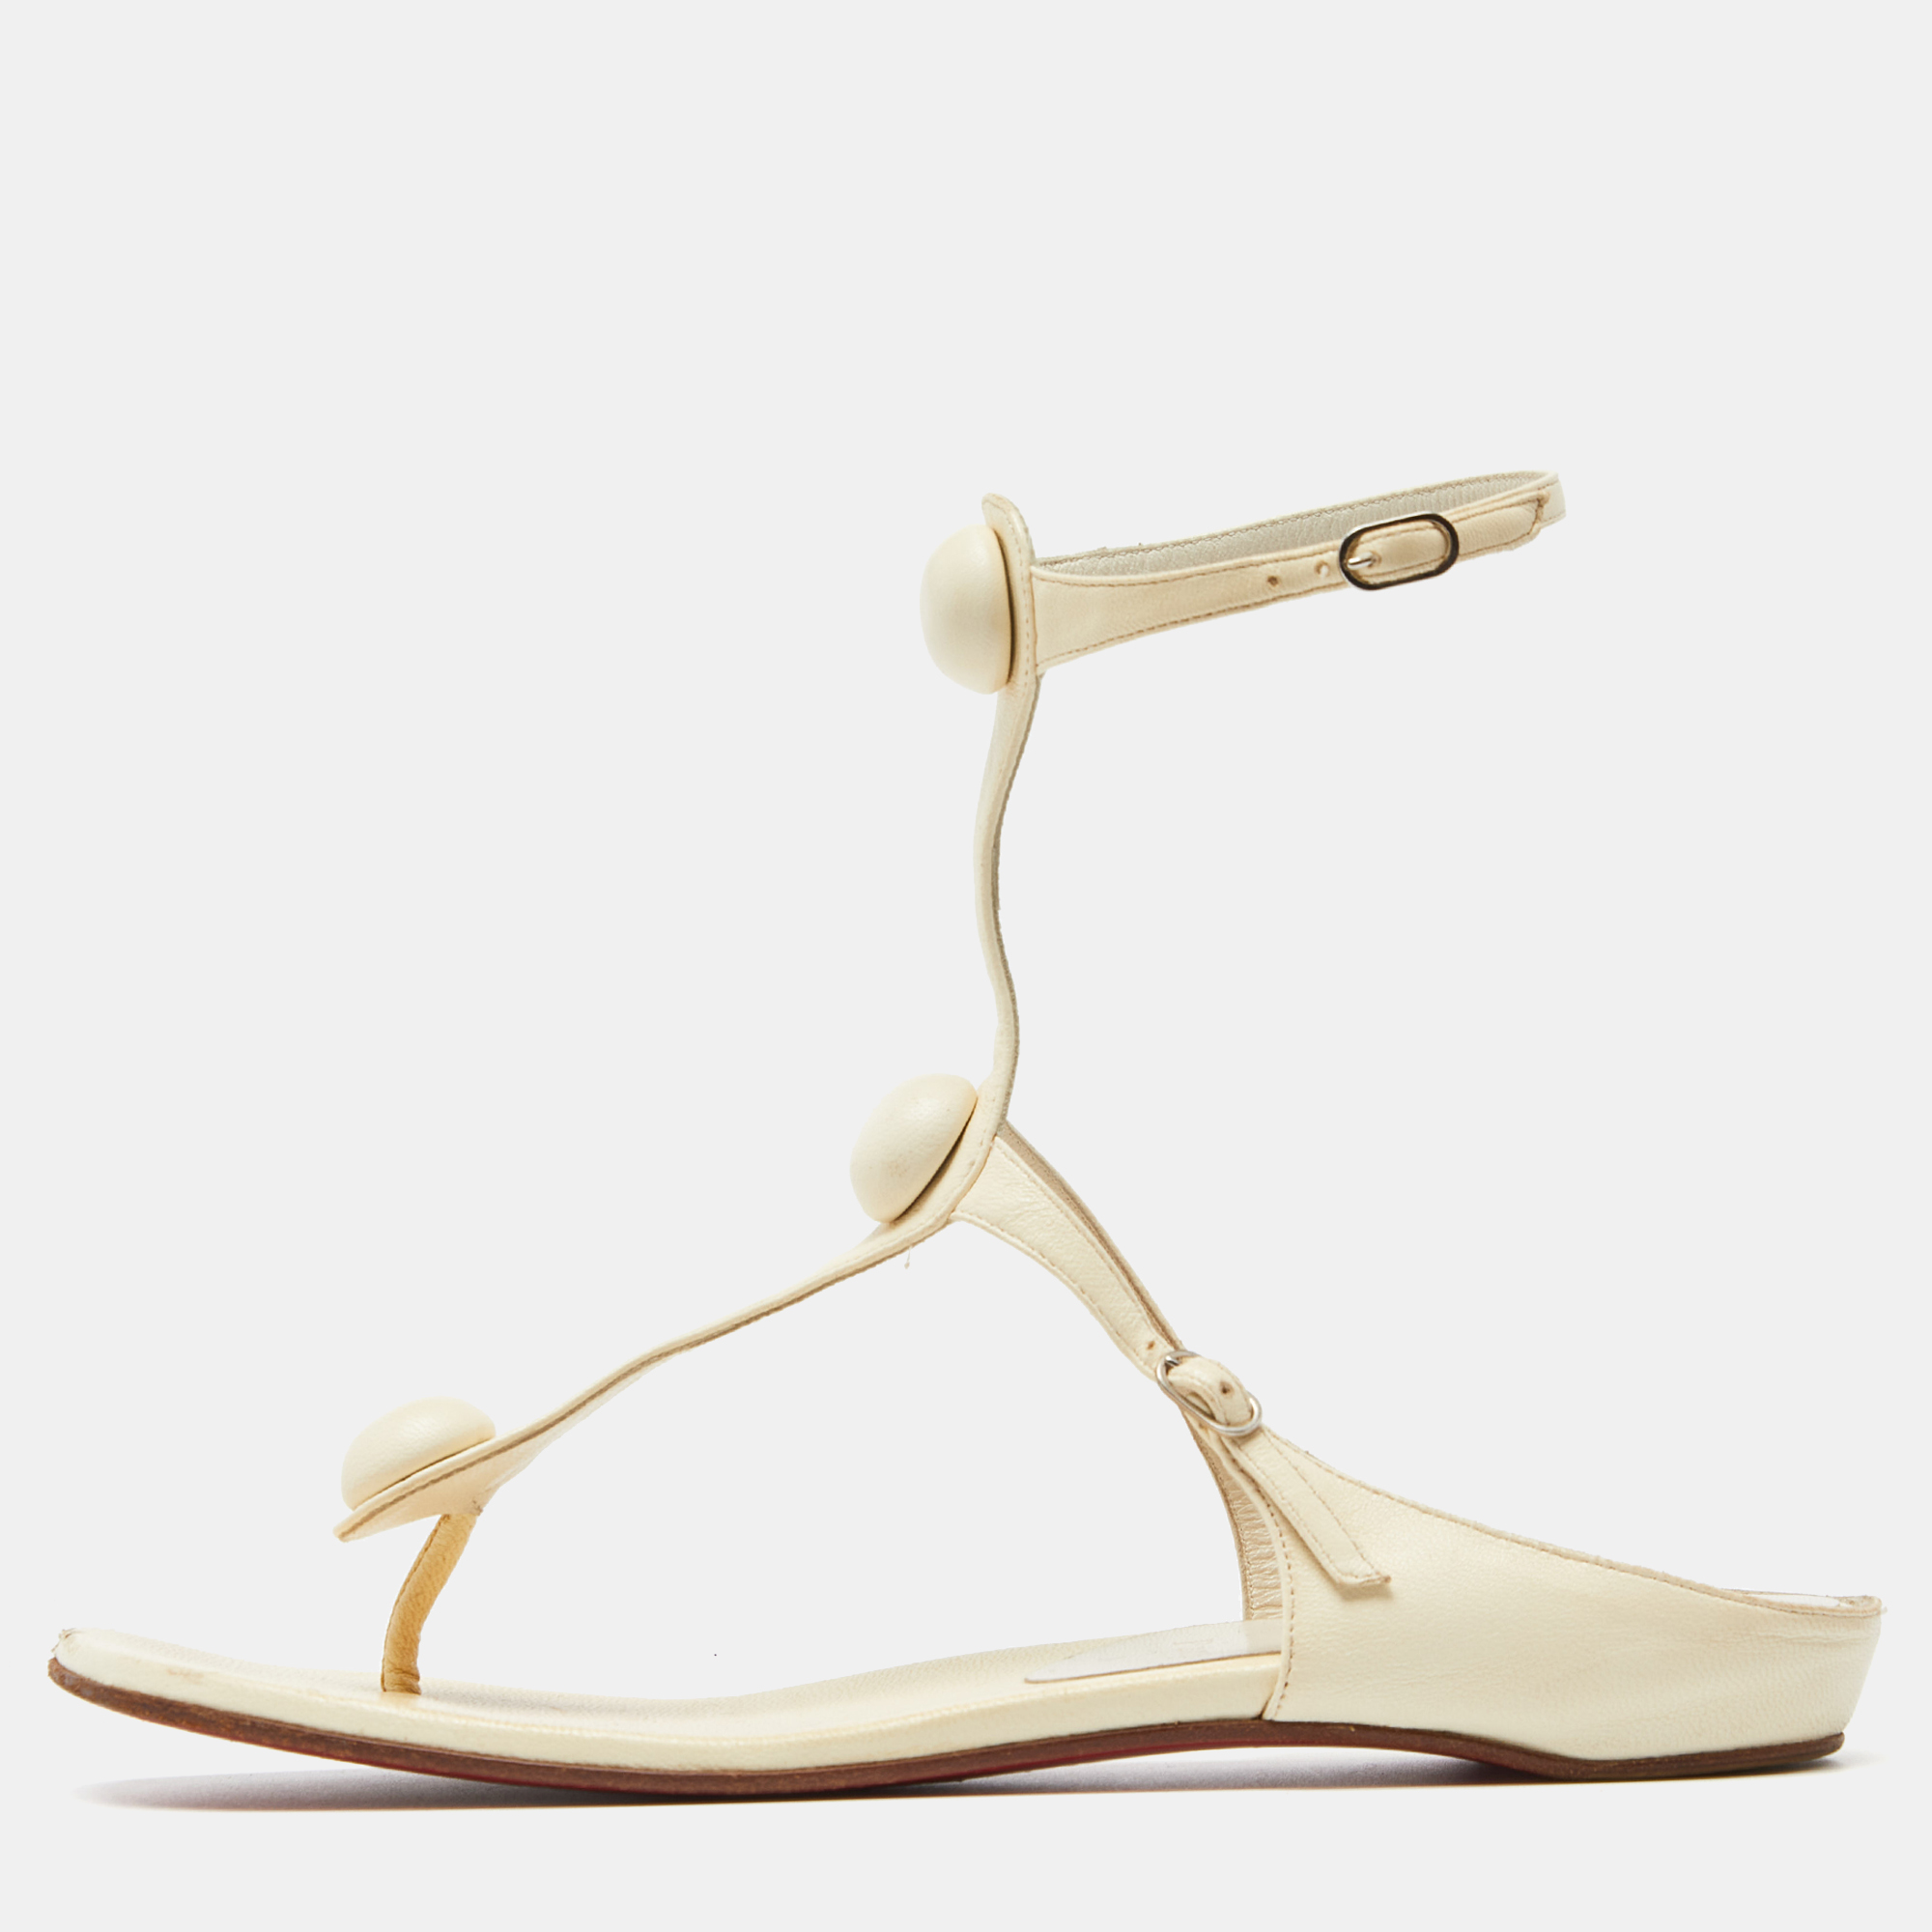 Christian louboutin cream leather thong ankle strap flat sandals size 38.5